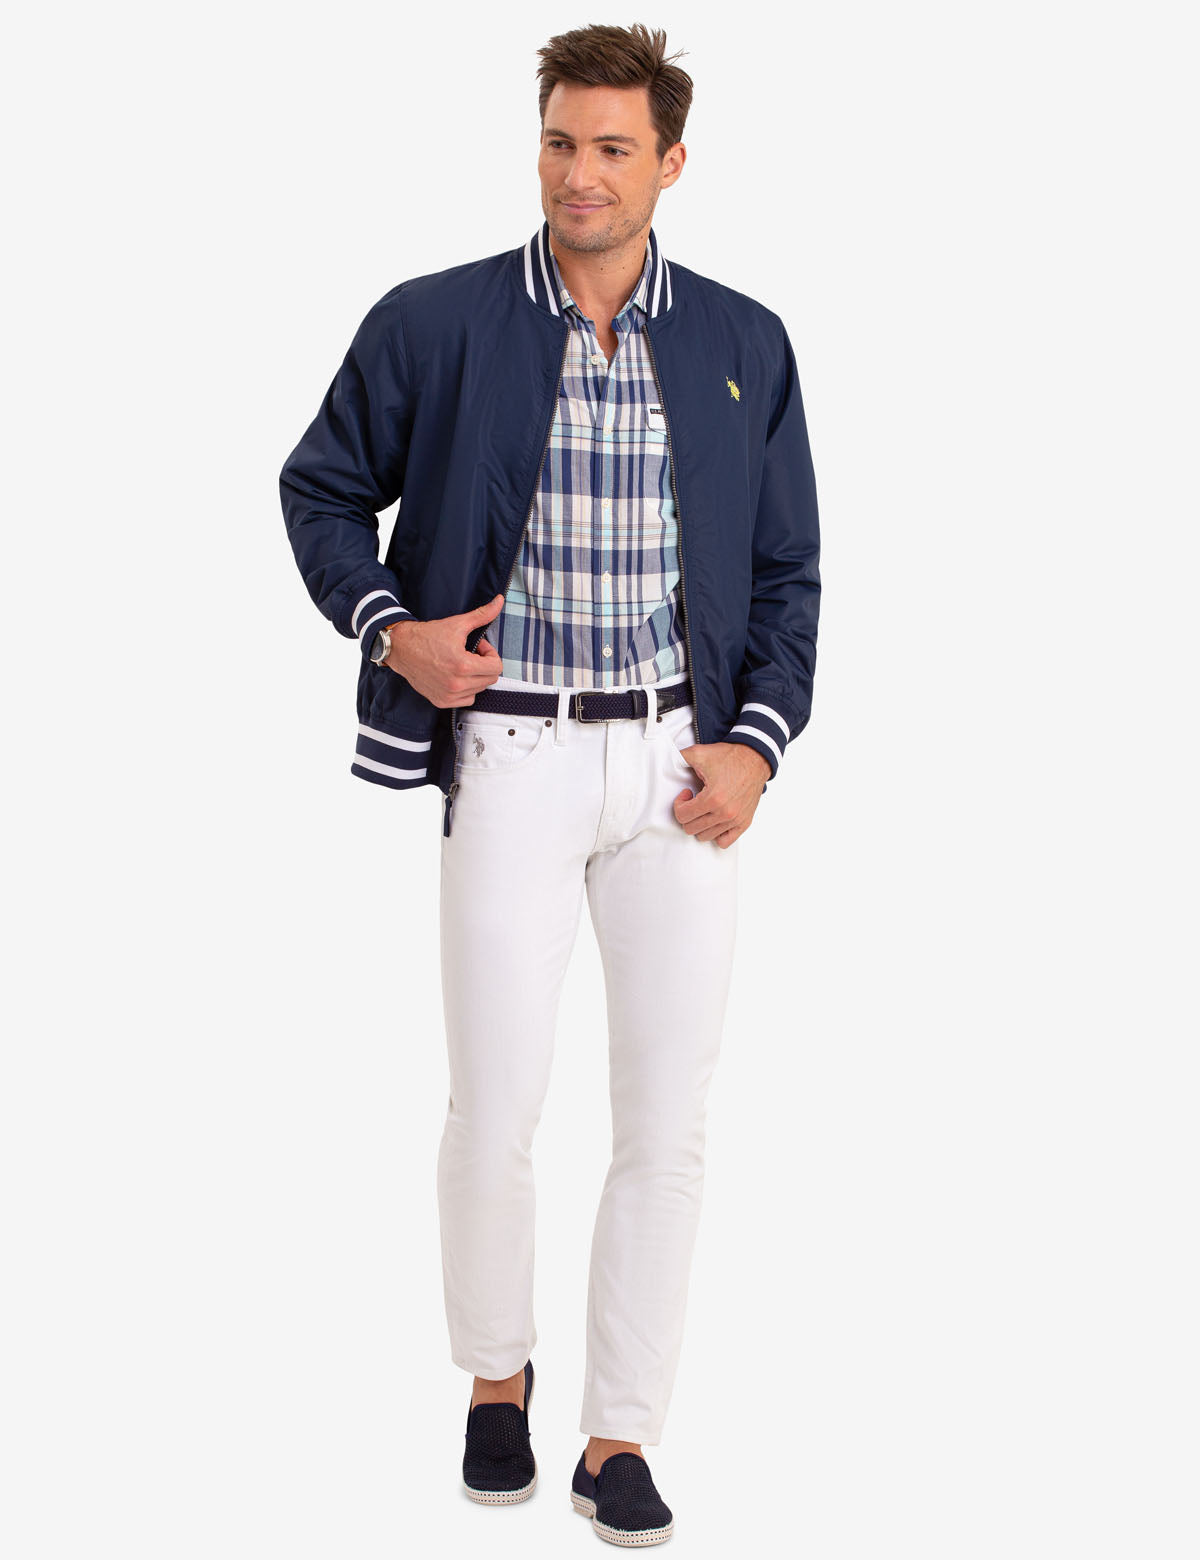 jacket with polo shirt